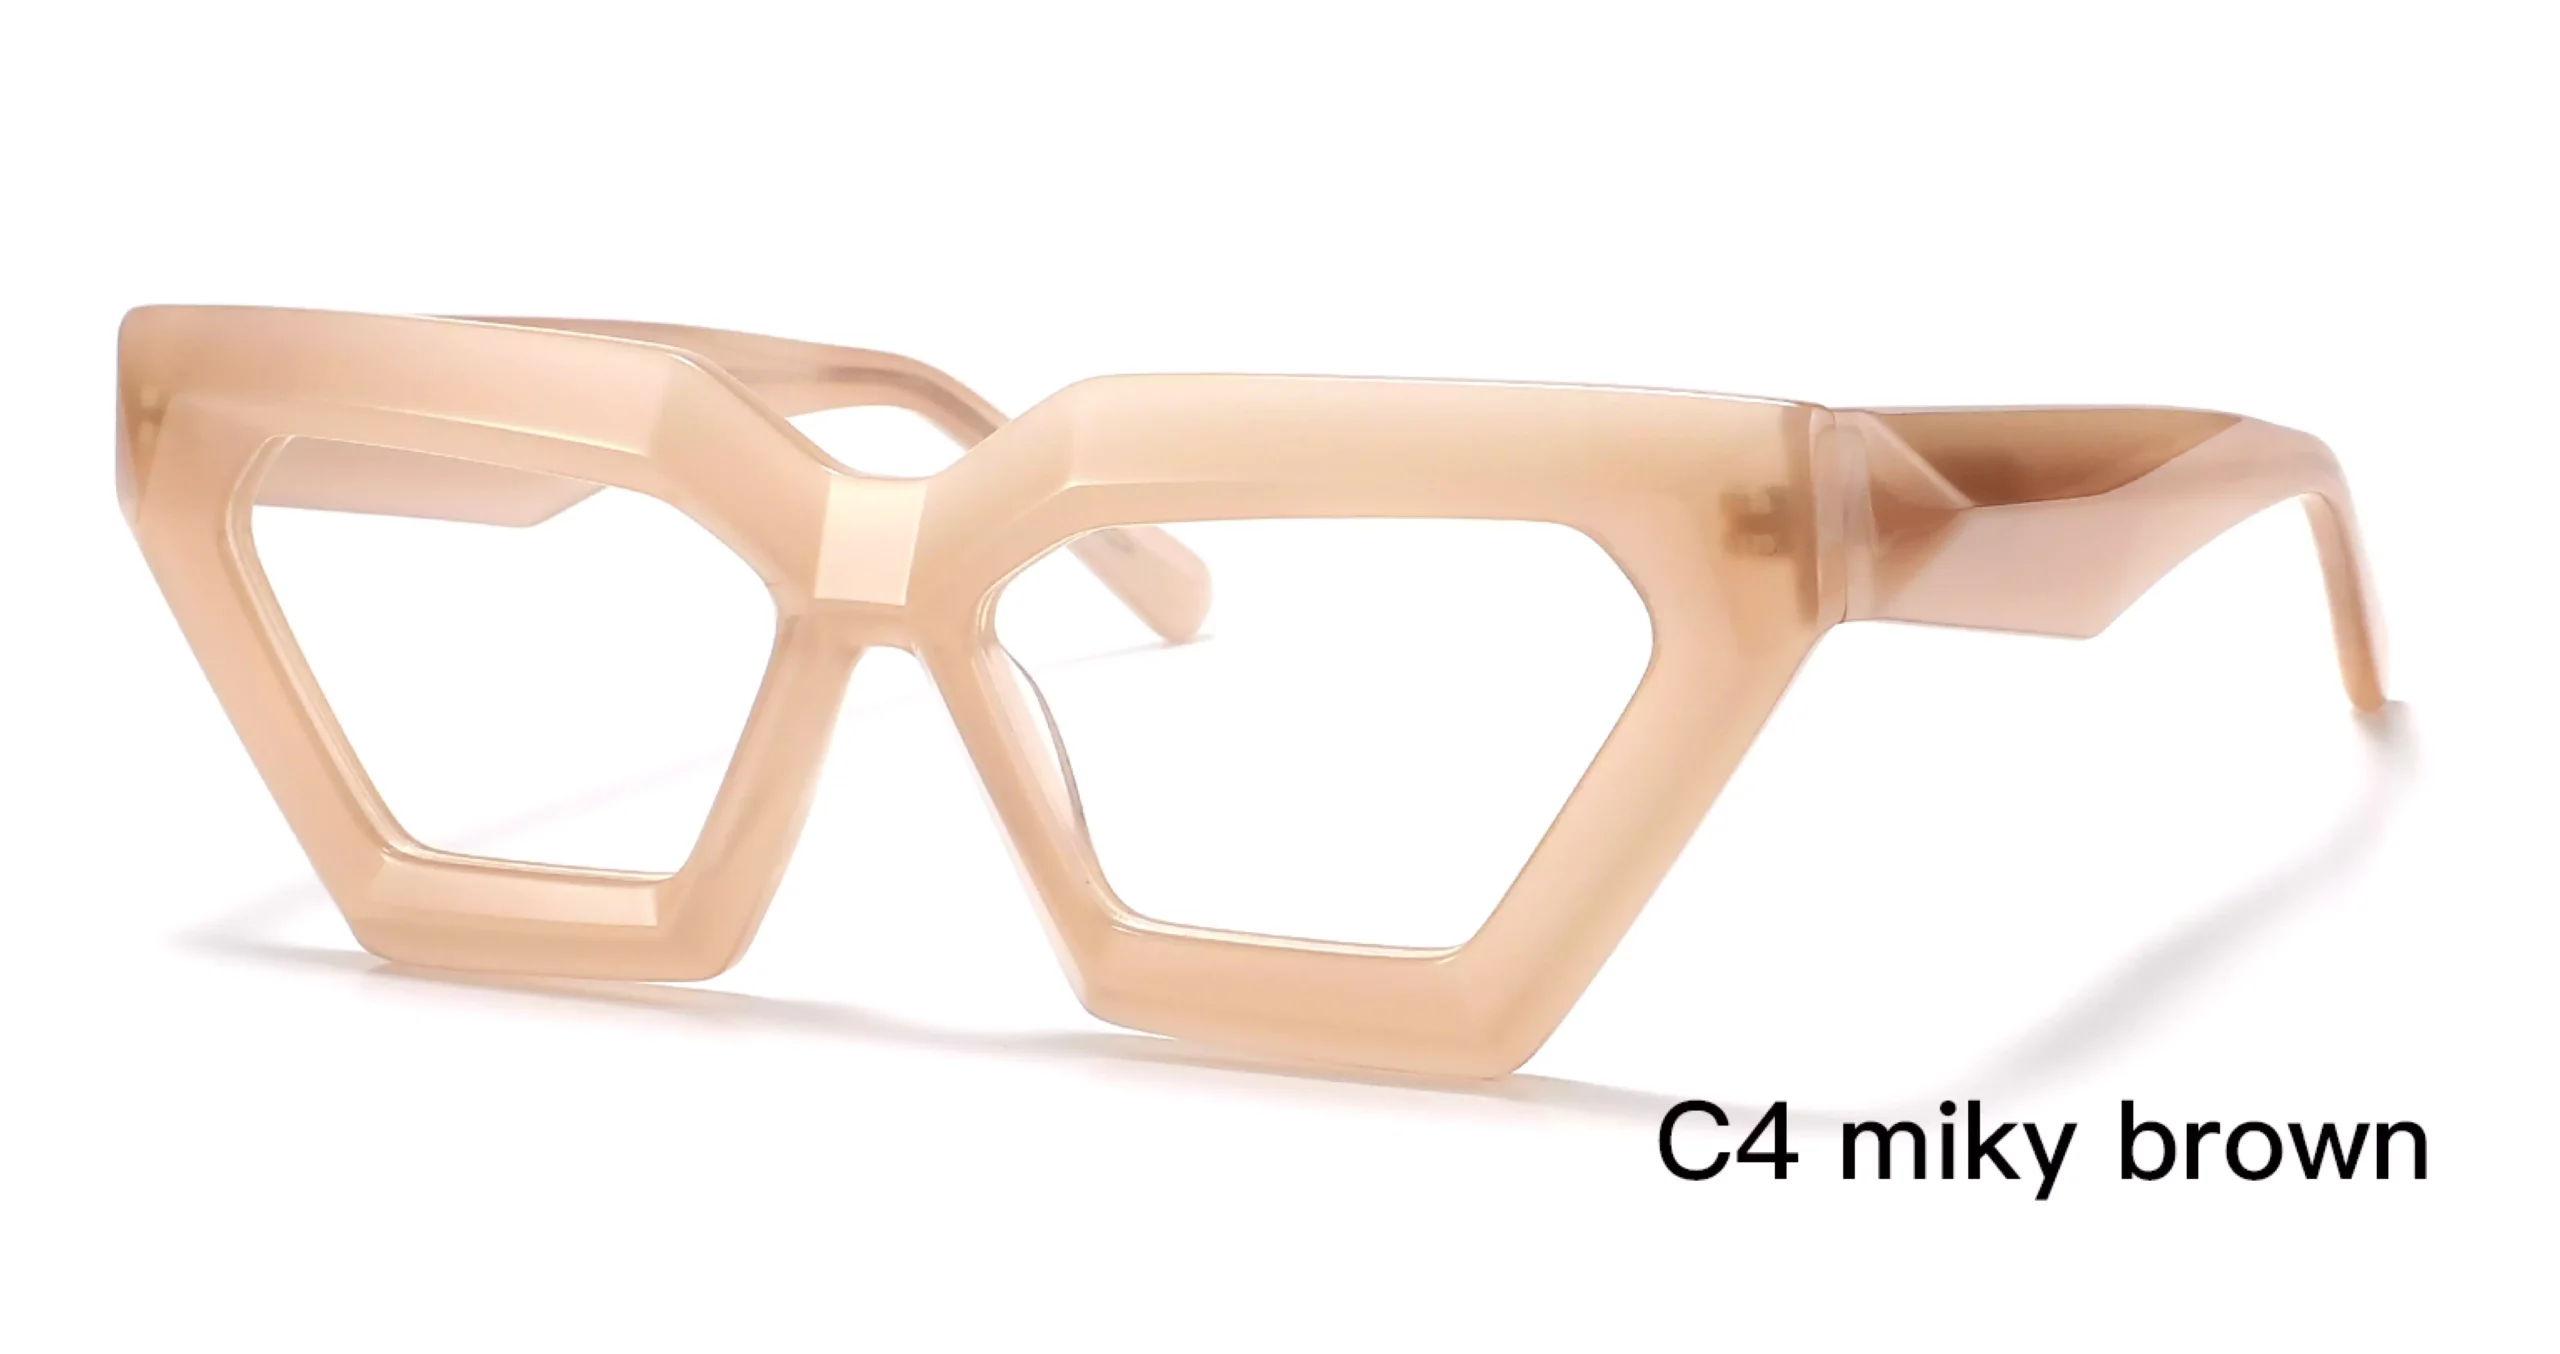 replica eyeglasses frames, designer, wholesale, miky brown, 45 degree display, made in China, acetate, unisex